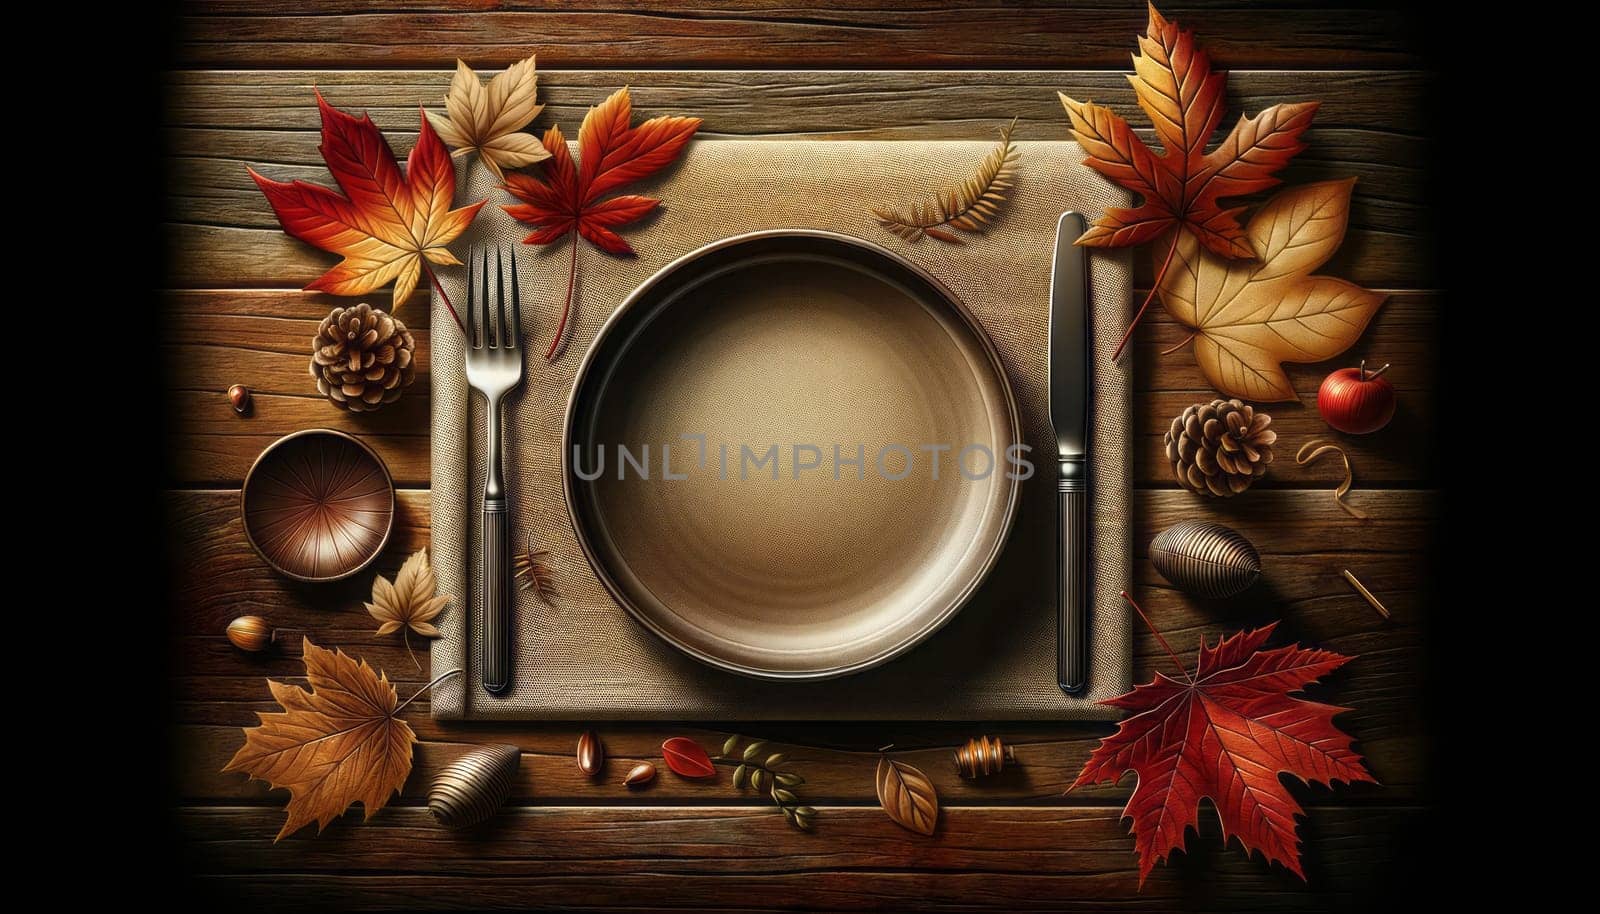 A digital illustration of an autumn-themed table by nkotlyar